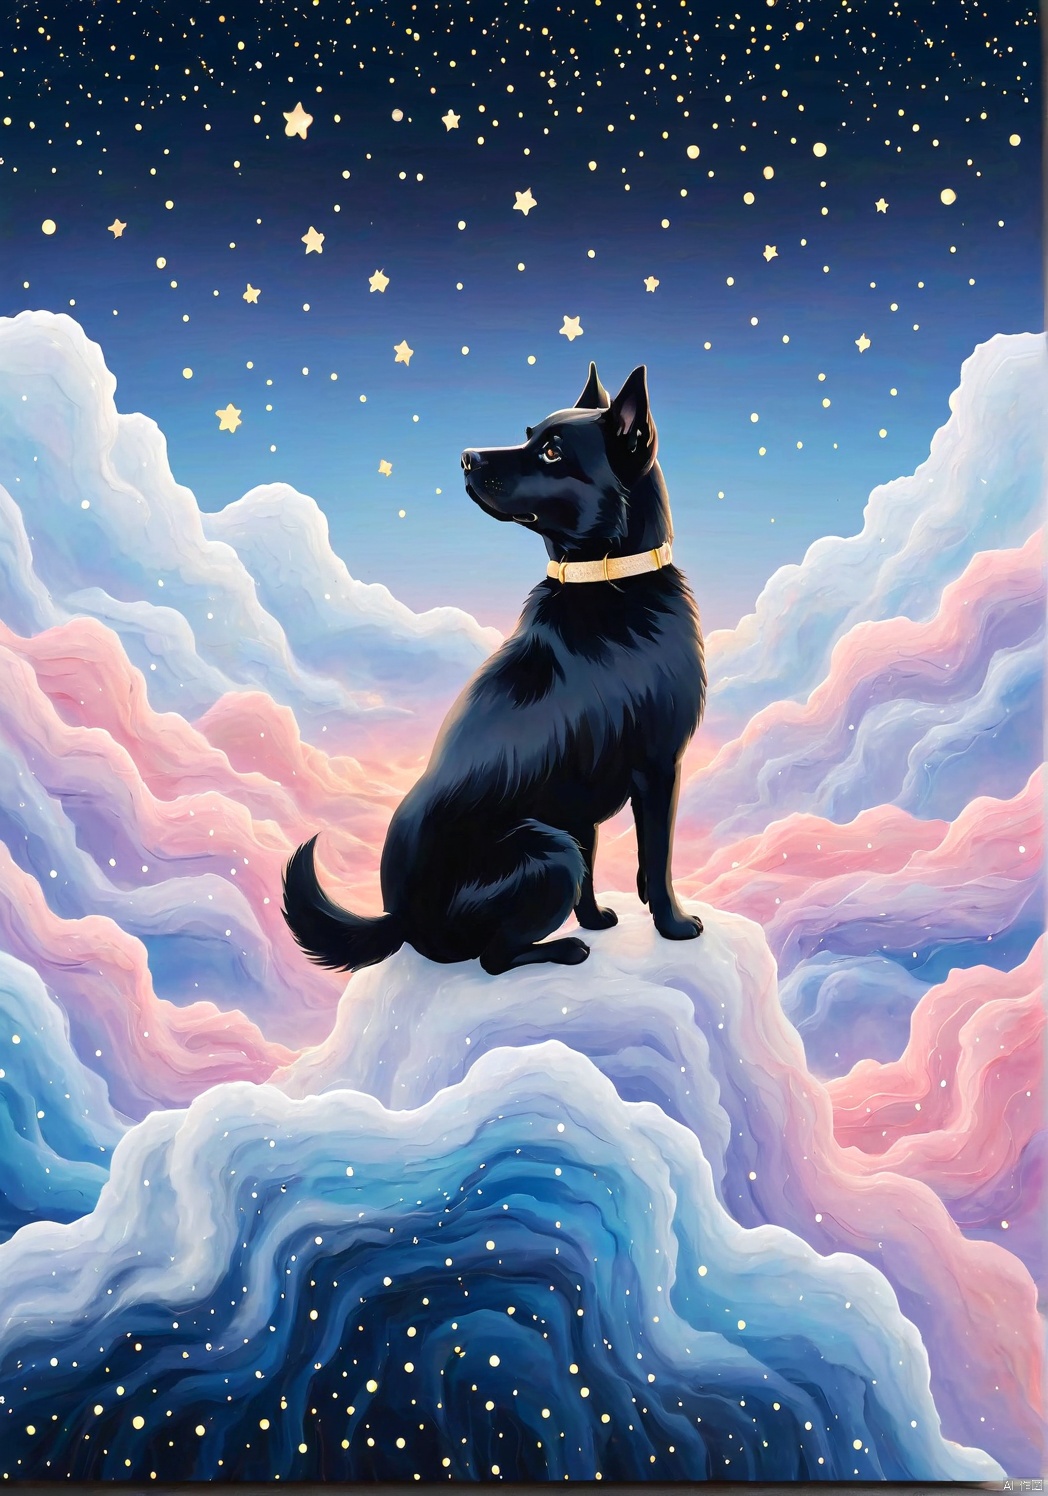 llustration style, hand-painted style,Black furry llustration  dog , sparkling Blister,dream, dreamy, stars, soft, clouds,  decoration, great works, 8k, movie texture, movie cg, clear details, rich picture, keai